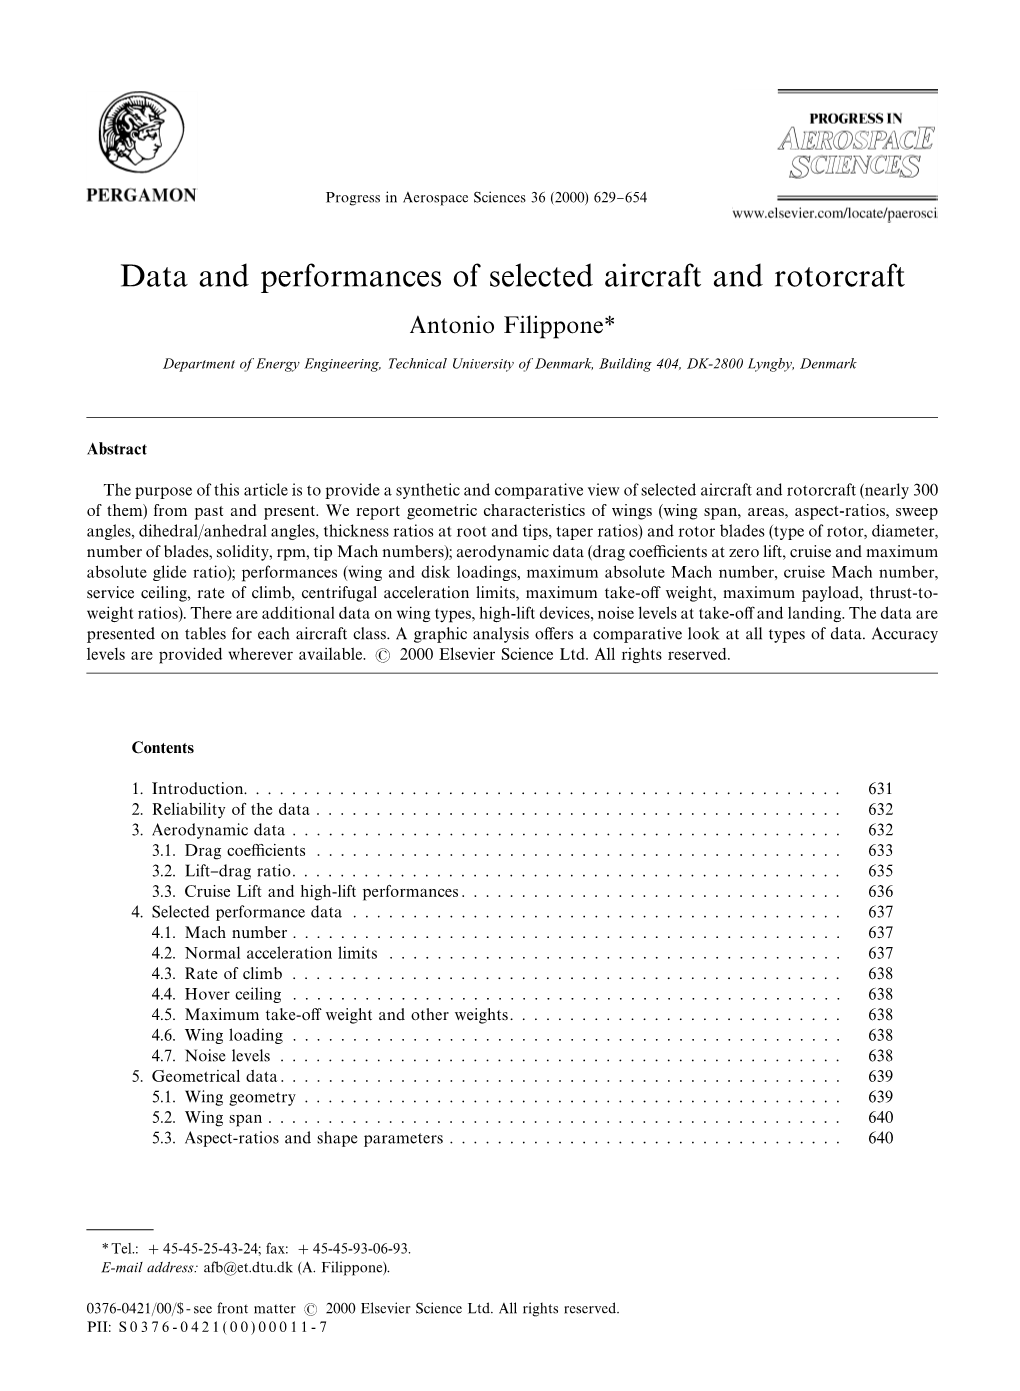 Data and Performances of Selected Aircraft and Rotorcraft Antonio Filippone*